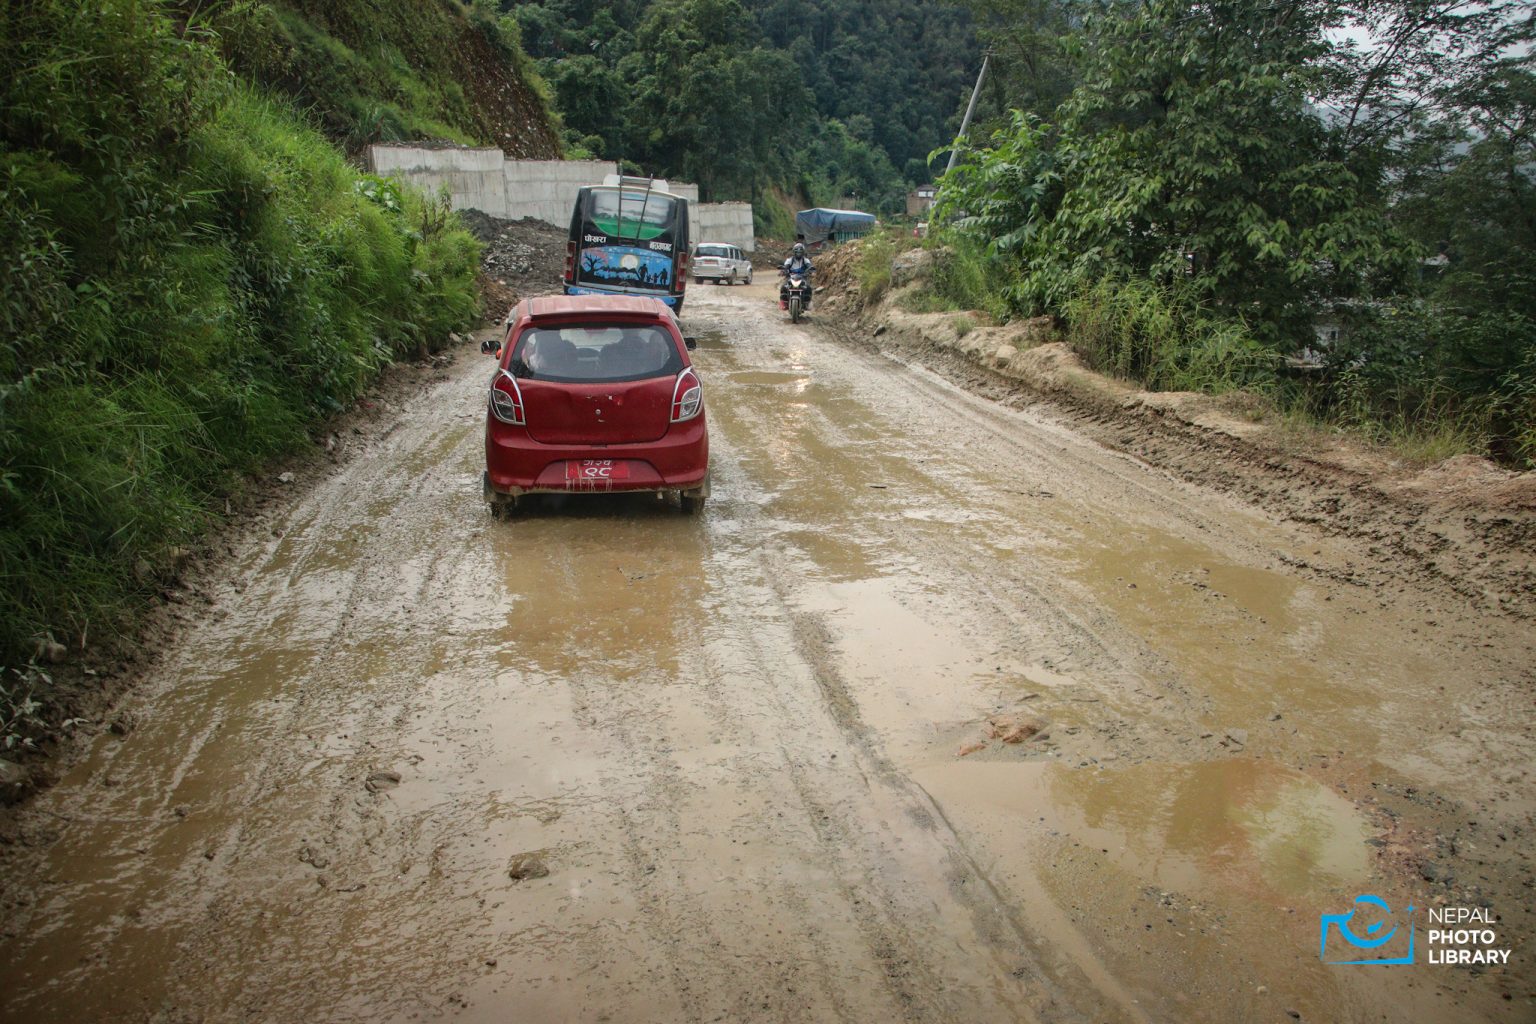 Prithvi Highway expansion causes Dashain travel woes: Dust & delays frustrate passengers (photos)